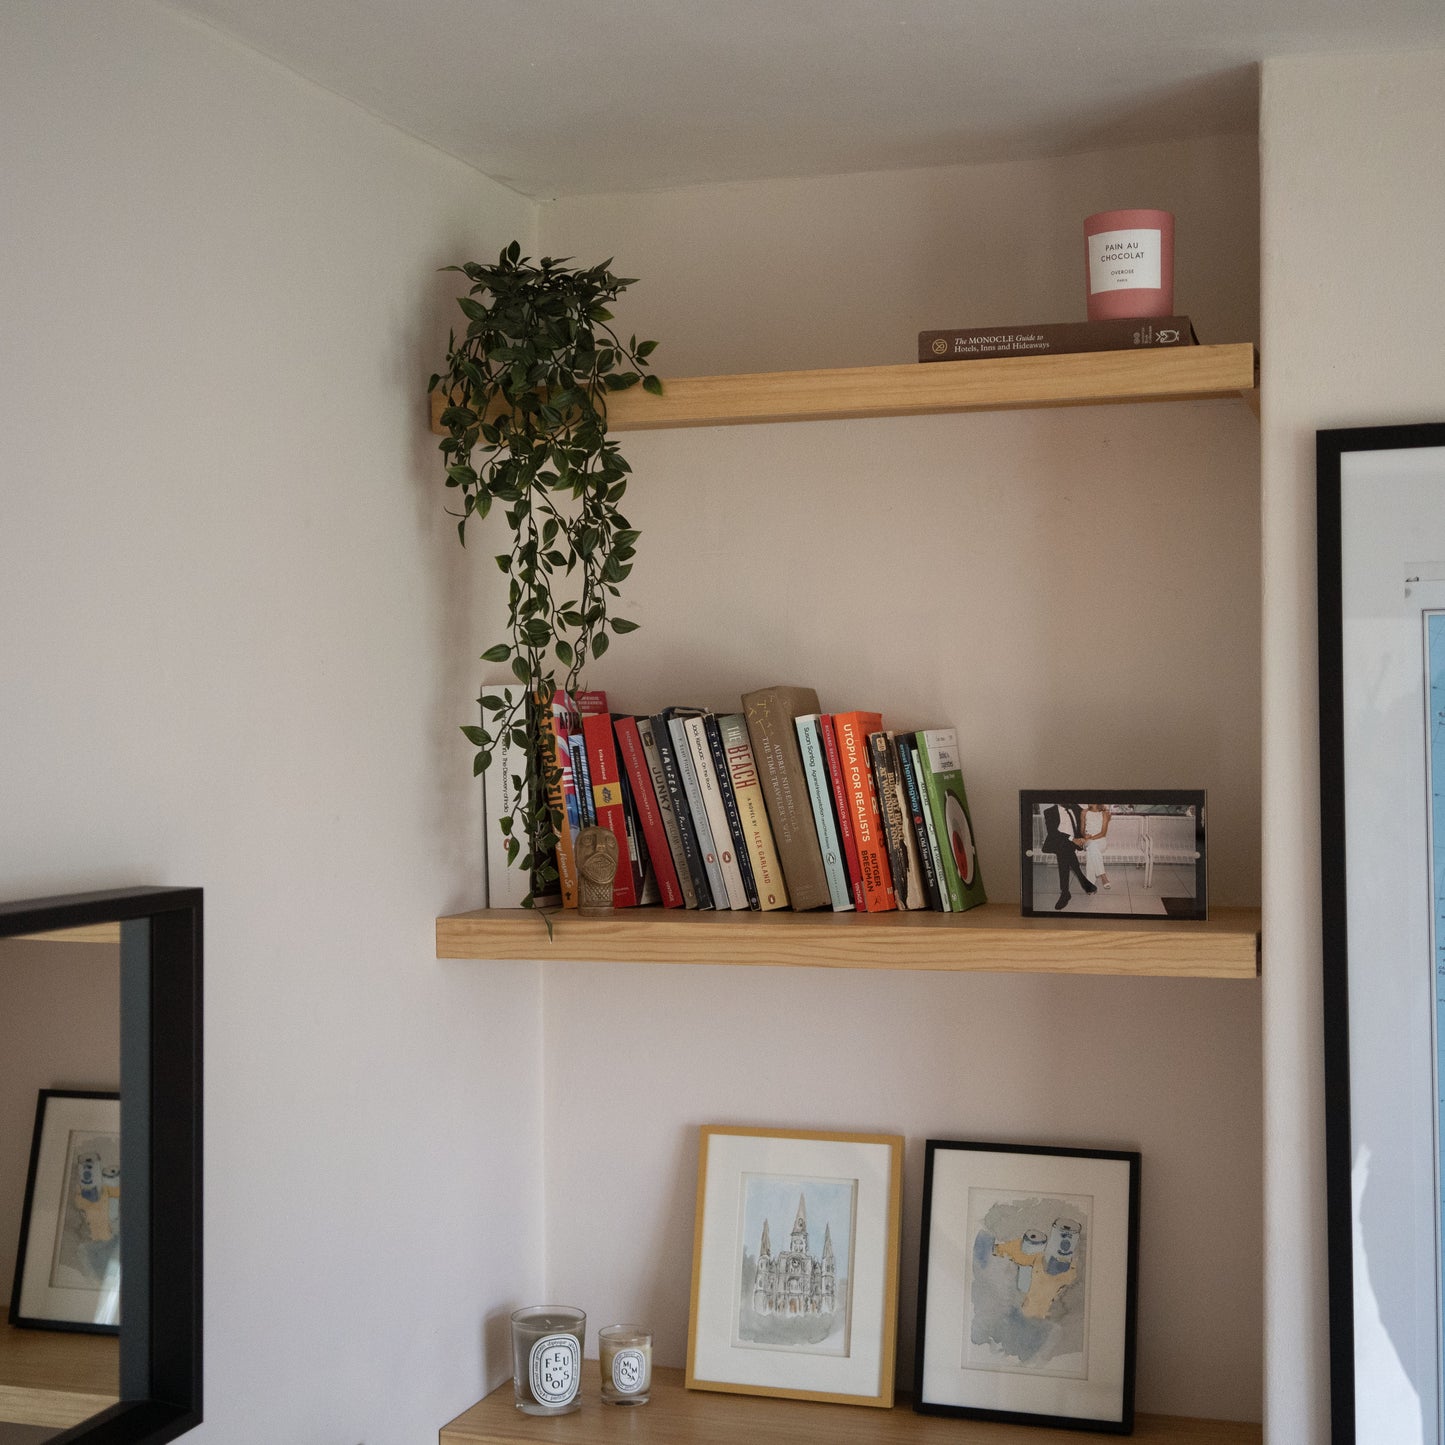 Solid Wood Alcove Floating Shelves - 50 cm by 42 cm